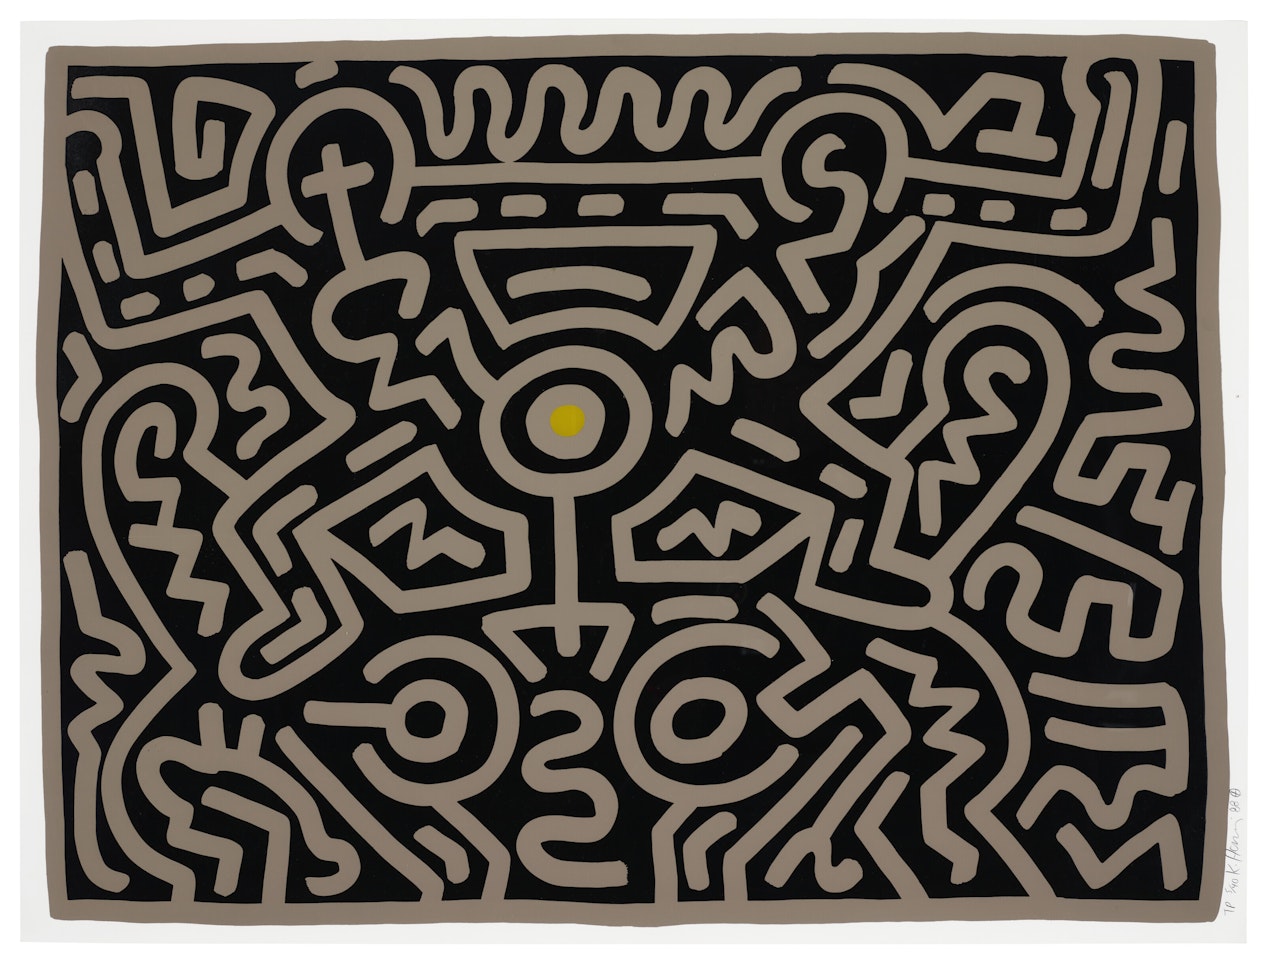 Growing: one print by Keith Haring